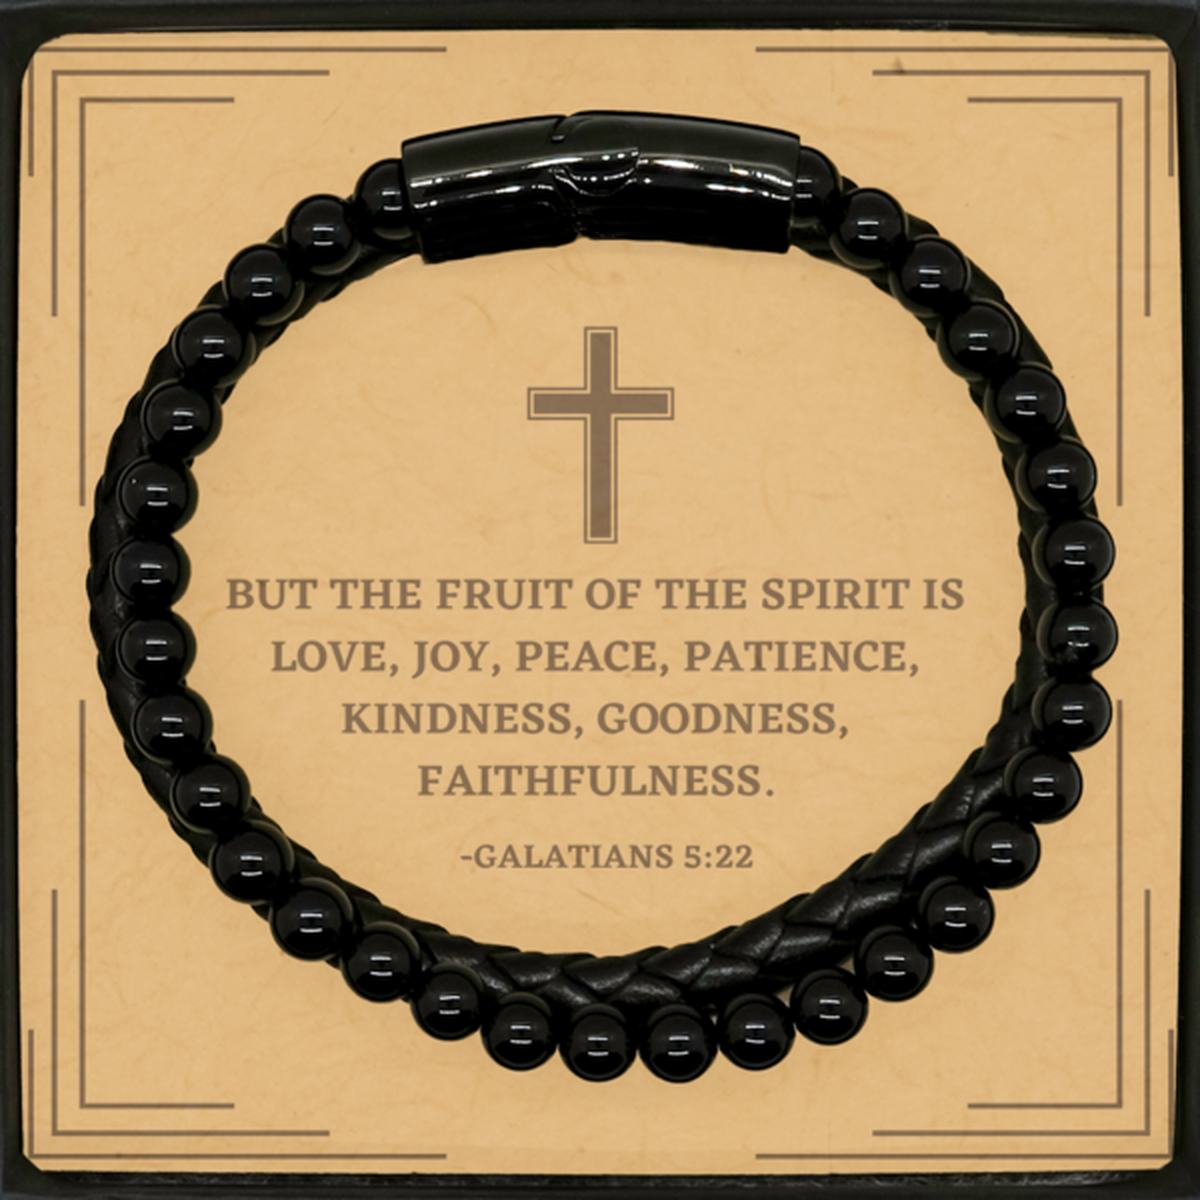 Baptism Gifts For Teenage Boys Girls, Christian Bible Verse Stone Leather Bracelet, But the fruit of the Spirit, Confirmation Gifts, Bible Verse Card for Son, Godson, Grandson